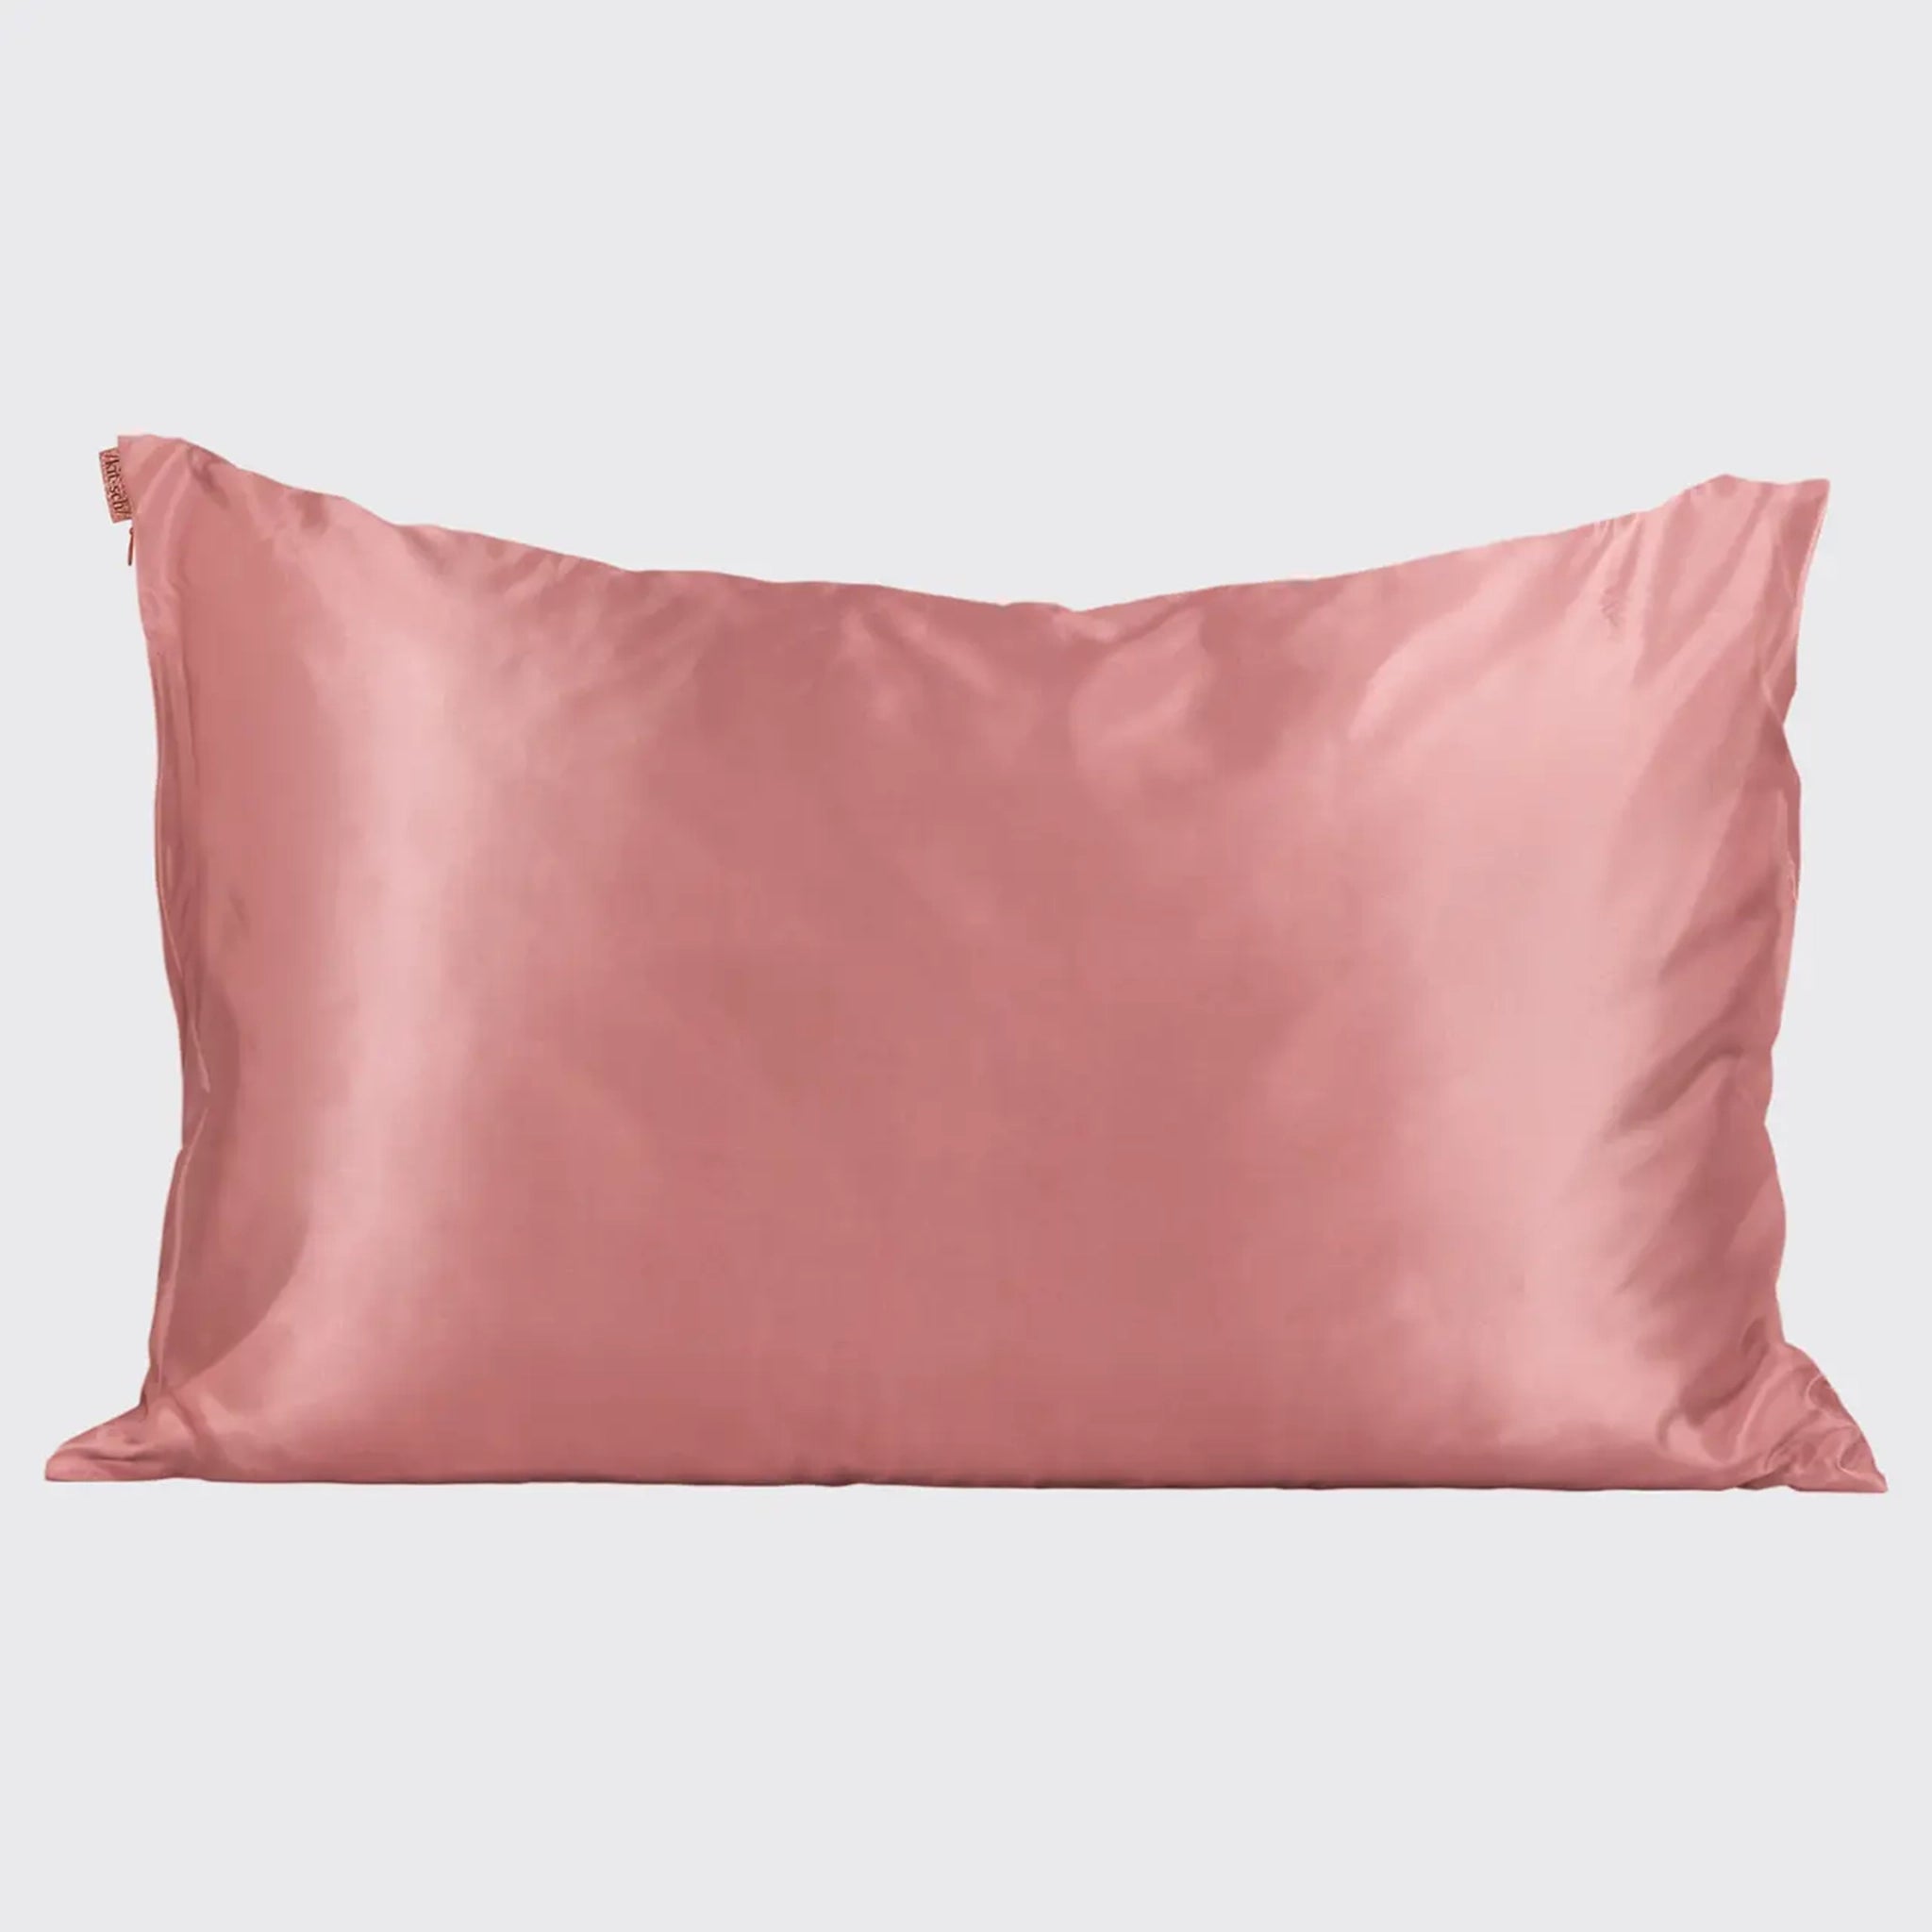 The rosey/terracotta colored satin pillow case on a pillow (not included).